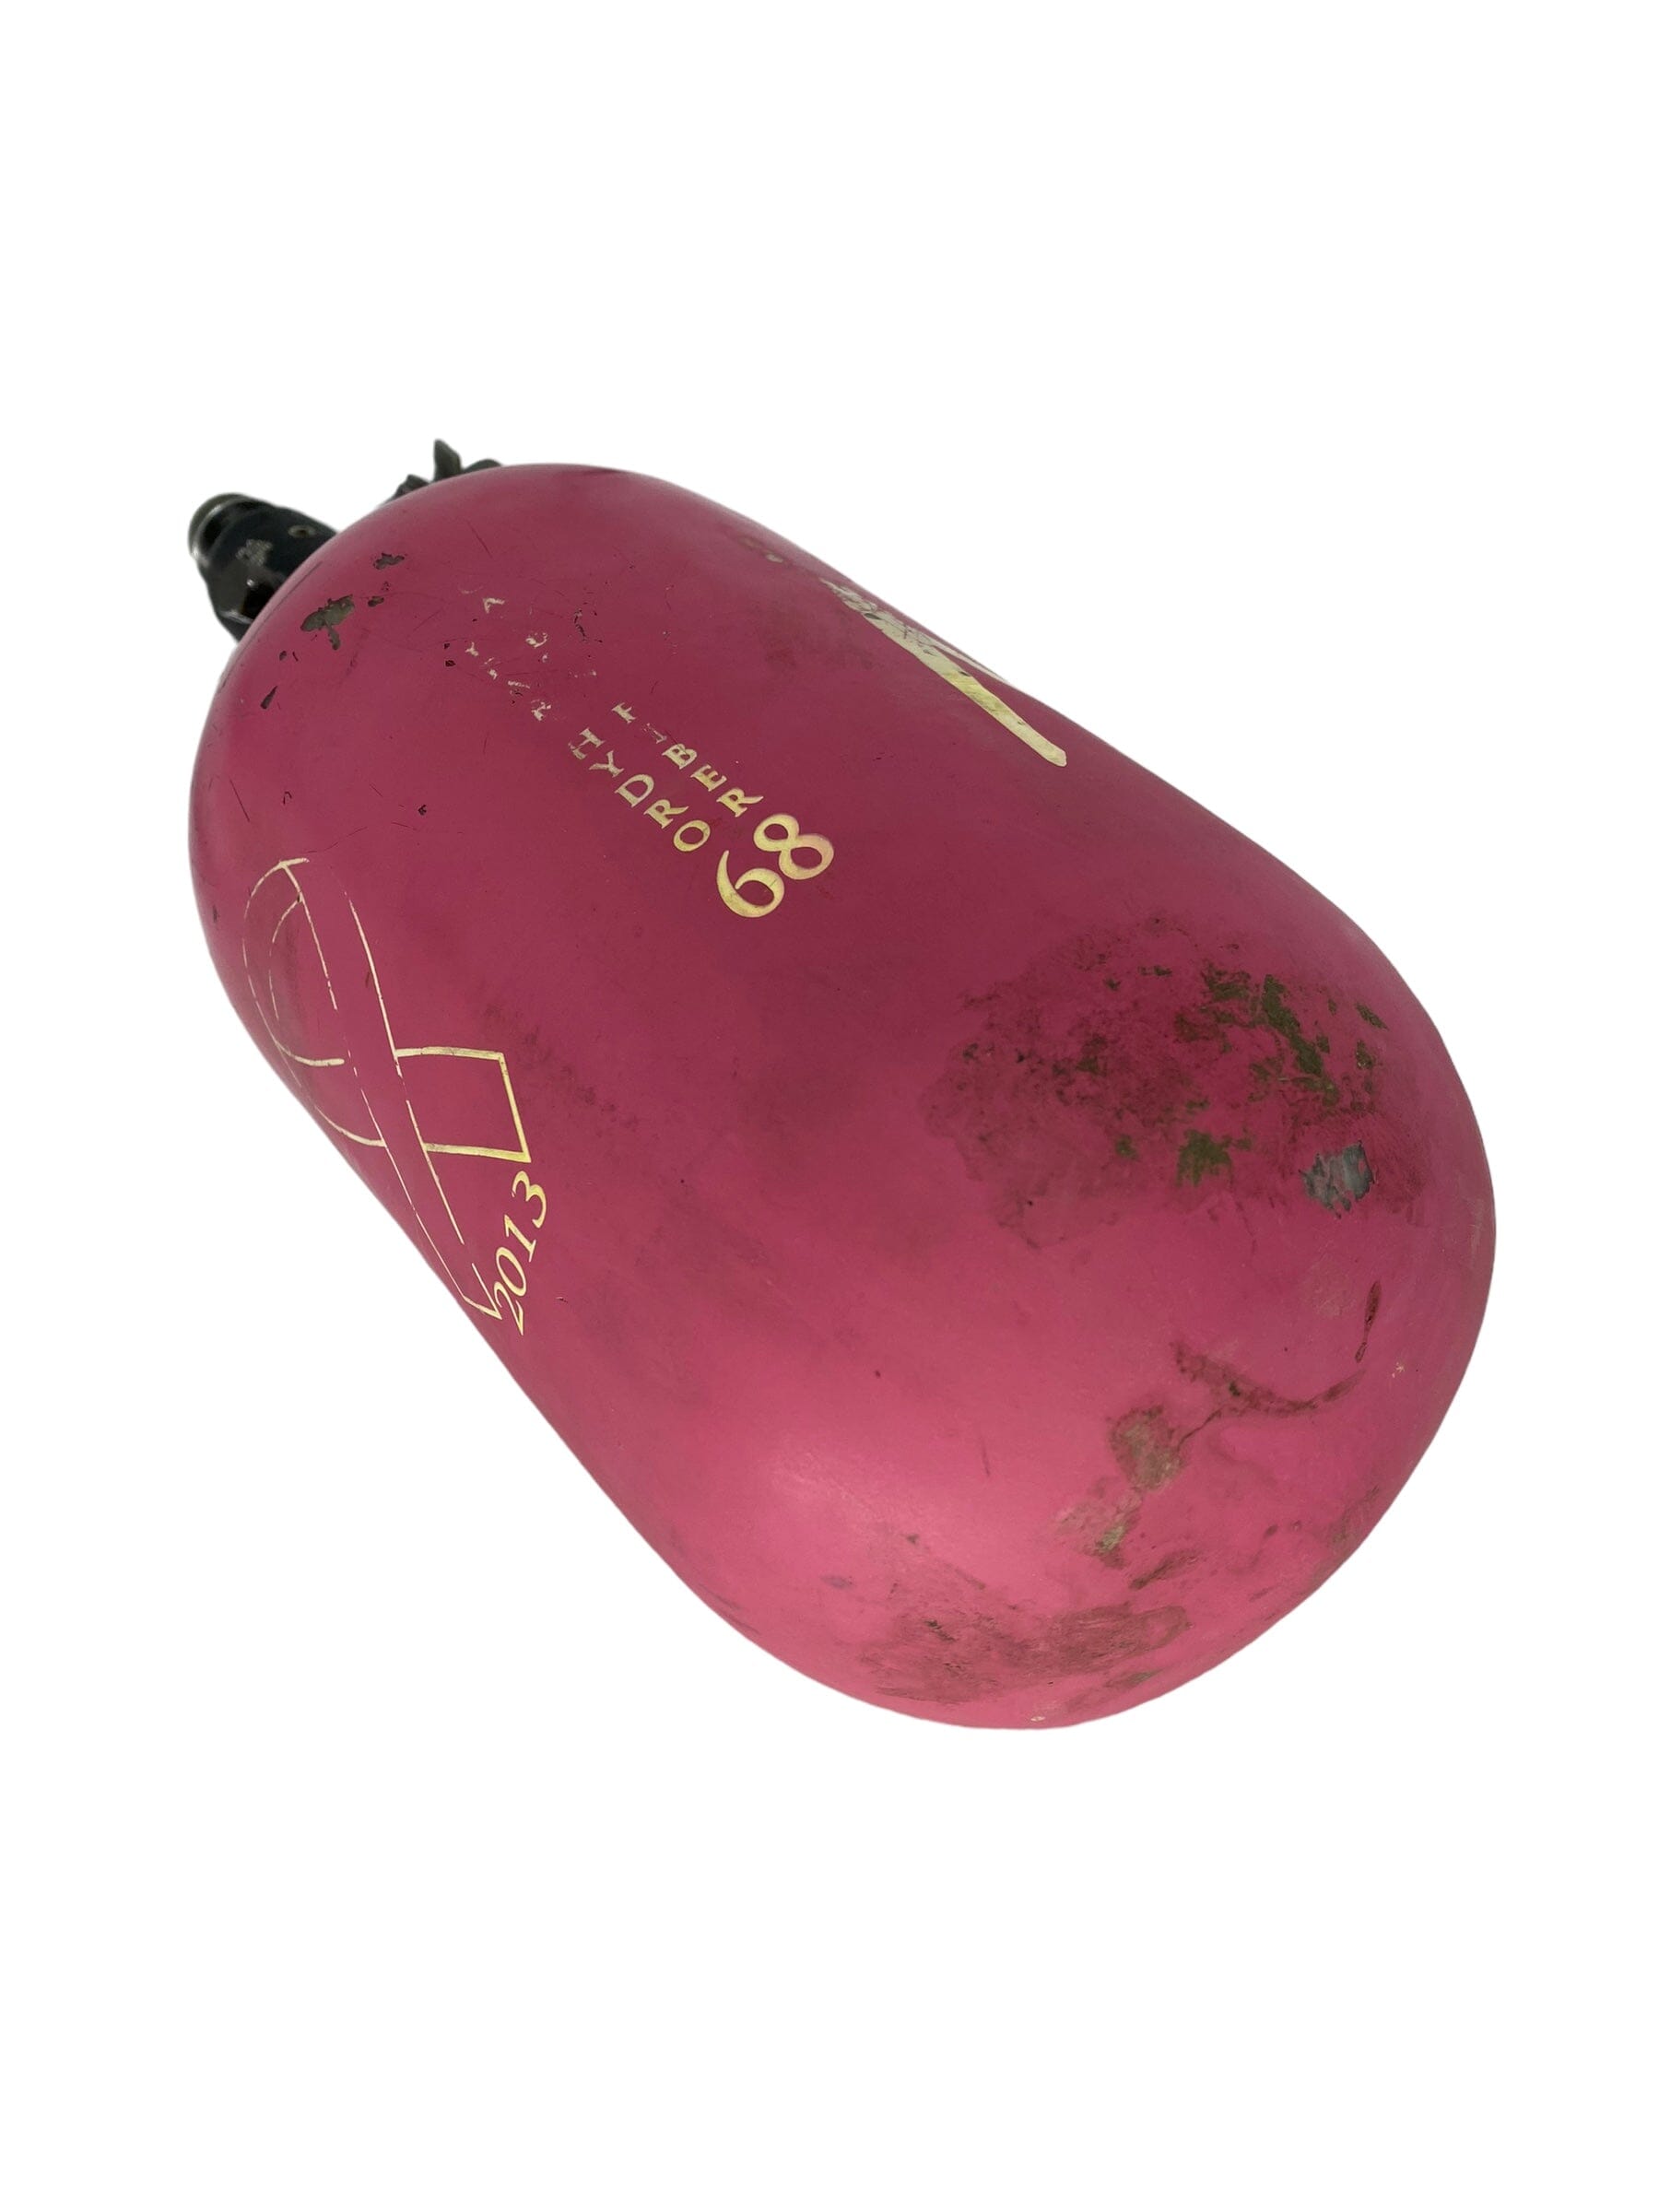 Used Ninja 68/4500 Paintball Tank-Pink Breast Cancer Awareness. Paintball Gun from CPXBrosPaintball Buy/Sell/Trade Paintball Markers, New Paintball Guns, Paintball Hoppers, Paintball Masks, and Hormesis Headbands